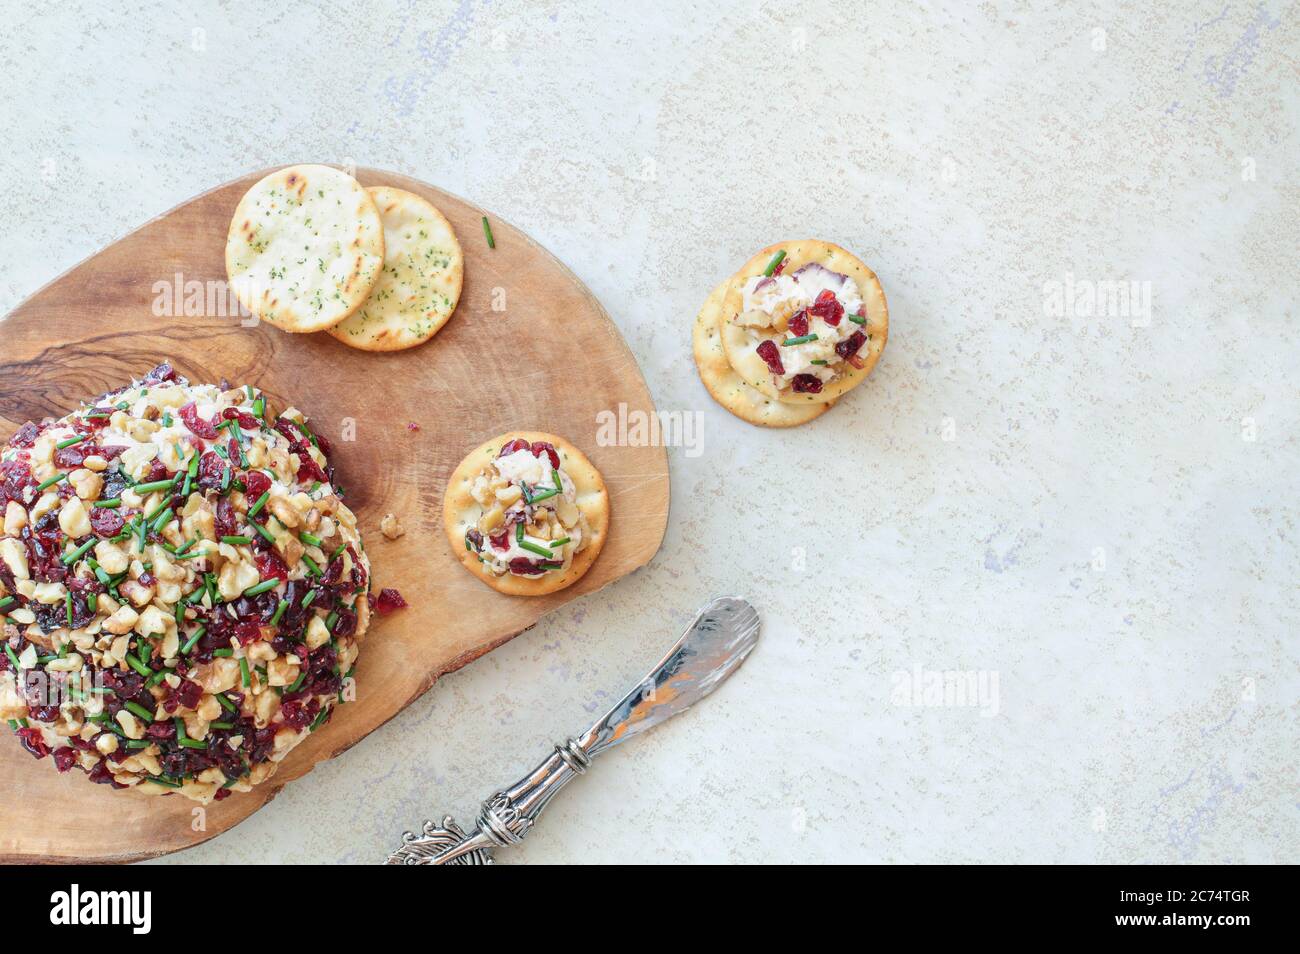 Fresh homemade cranberry cheese spread made with cream cheese, white cheddar, dried cranberries, walnuts, and chive over a marble background with copy Stock Photo